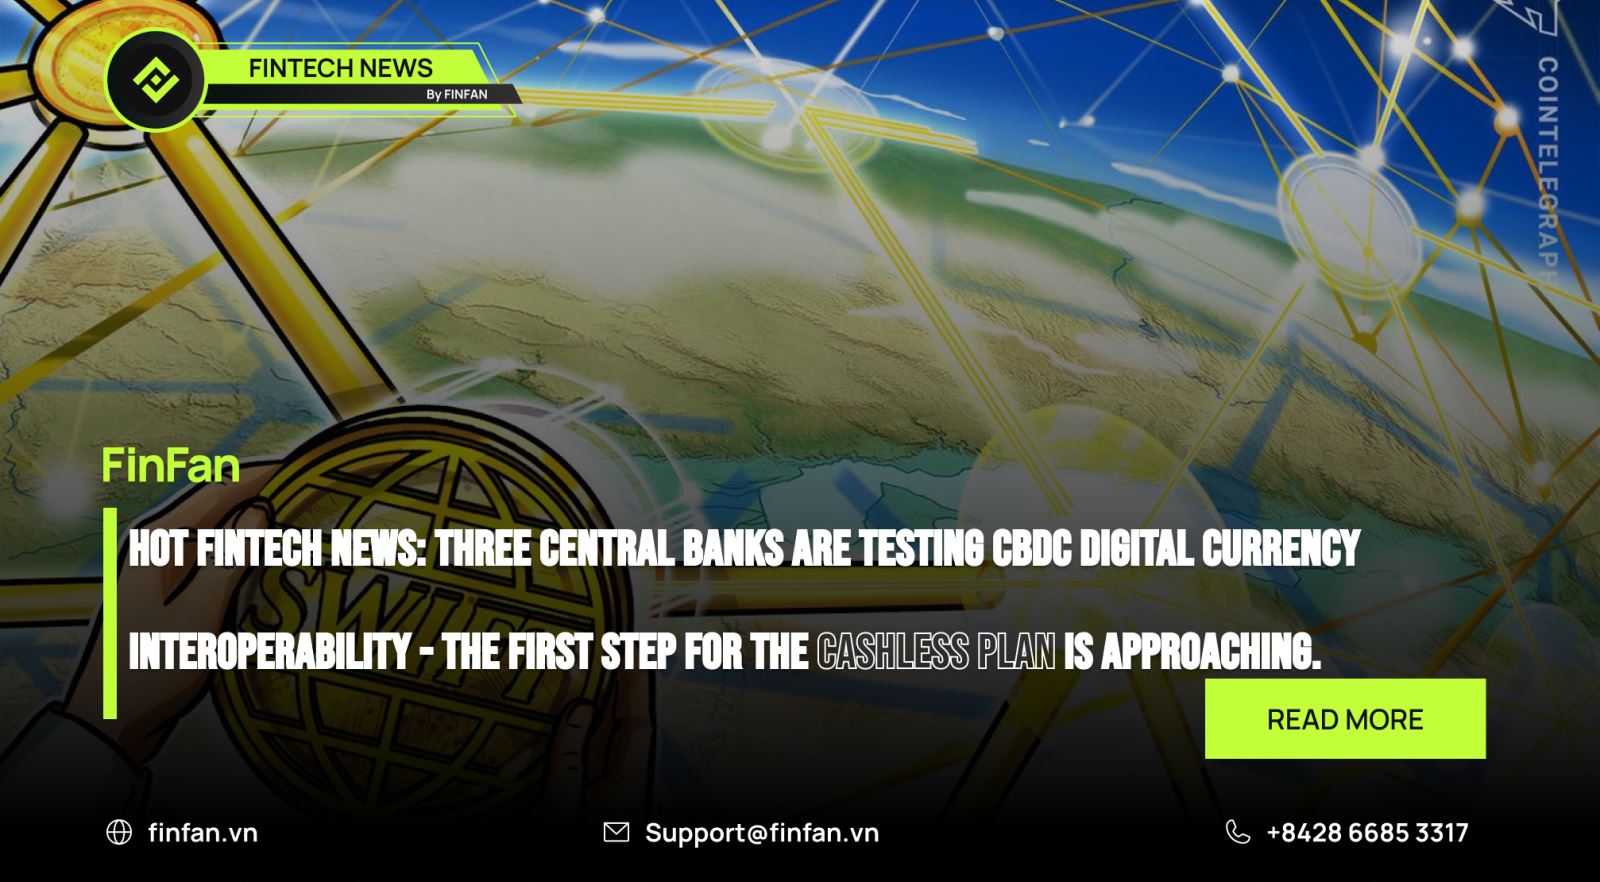 Hot Fintech News: Three Central Banks Are Testing CBDC Digital Currency Interoperability - The First Step For The Cashless Plan Is Approaching.